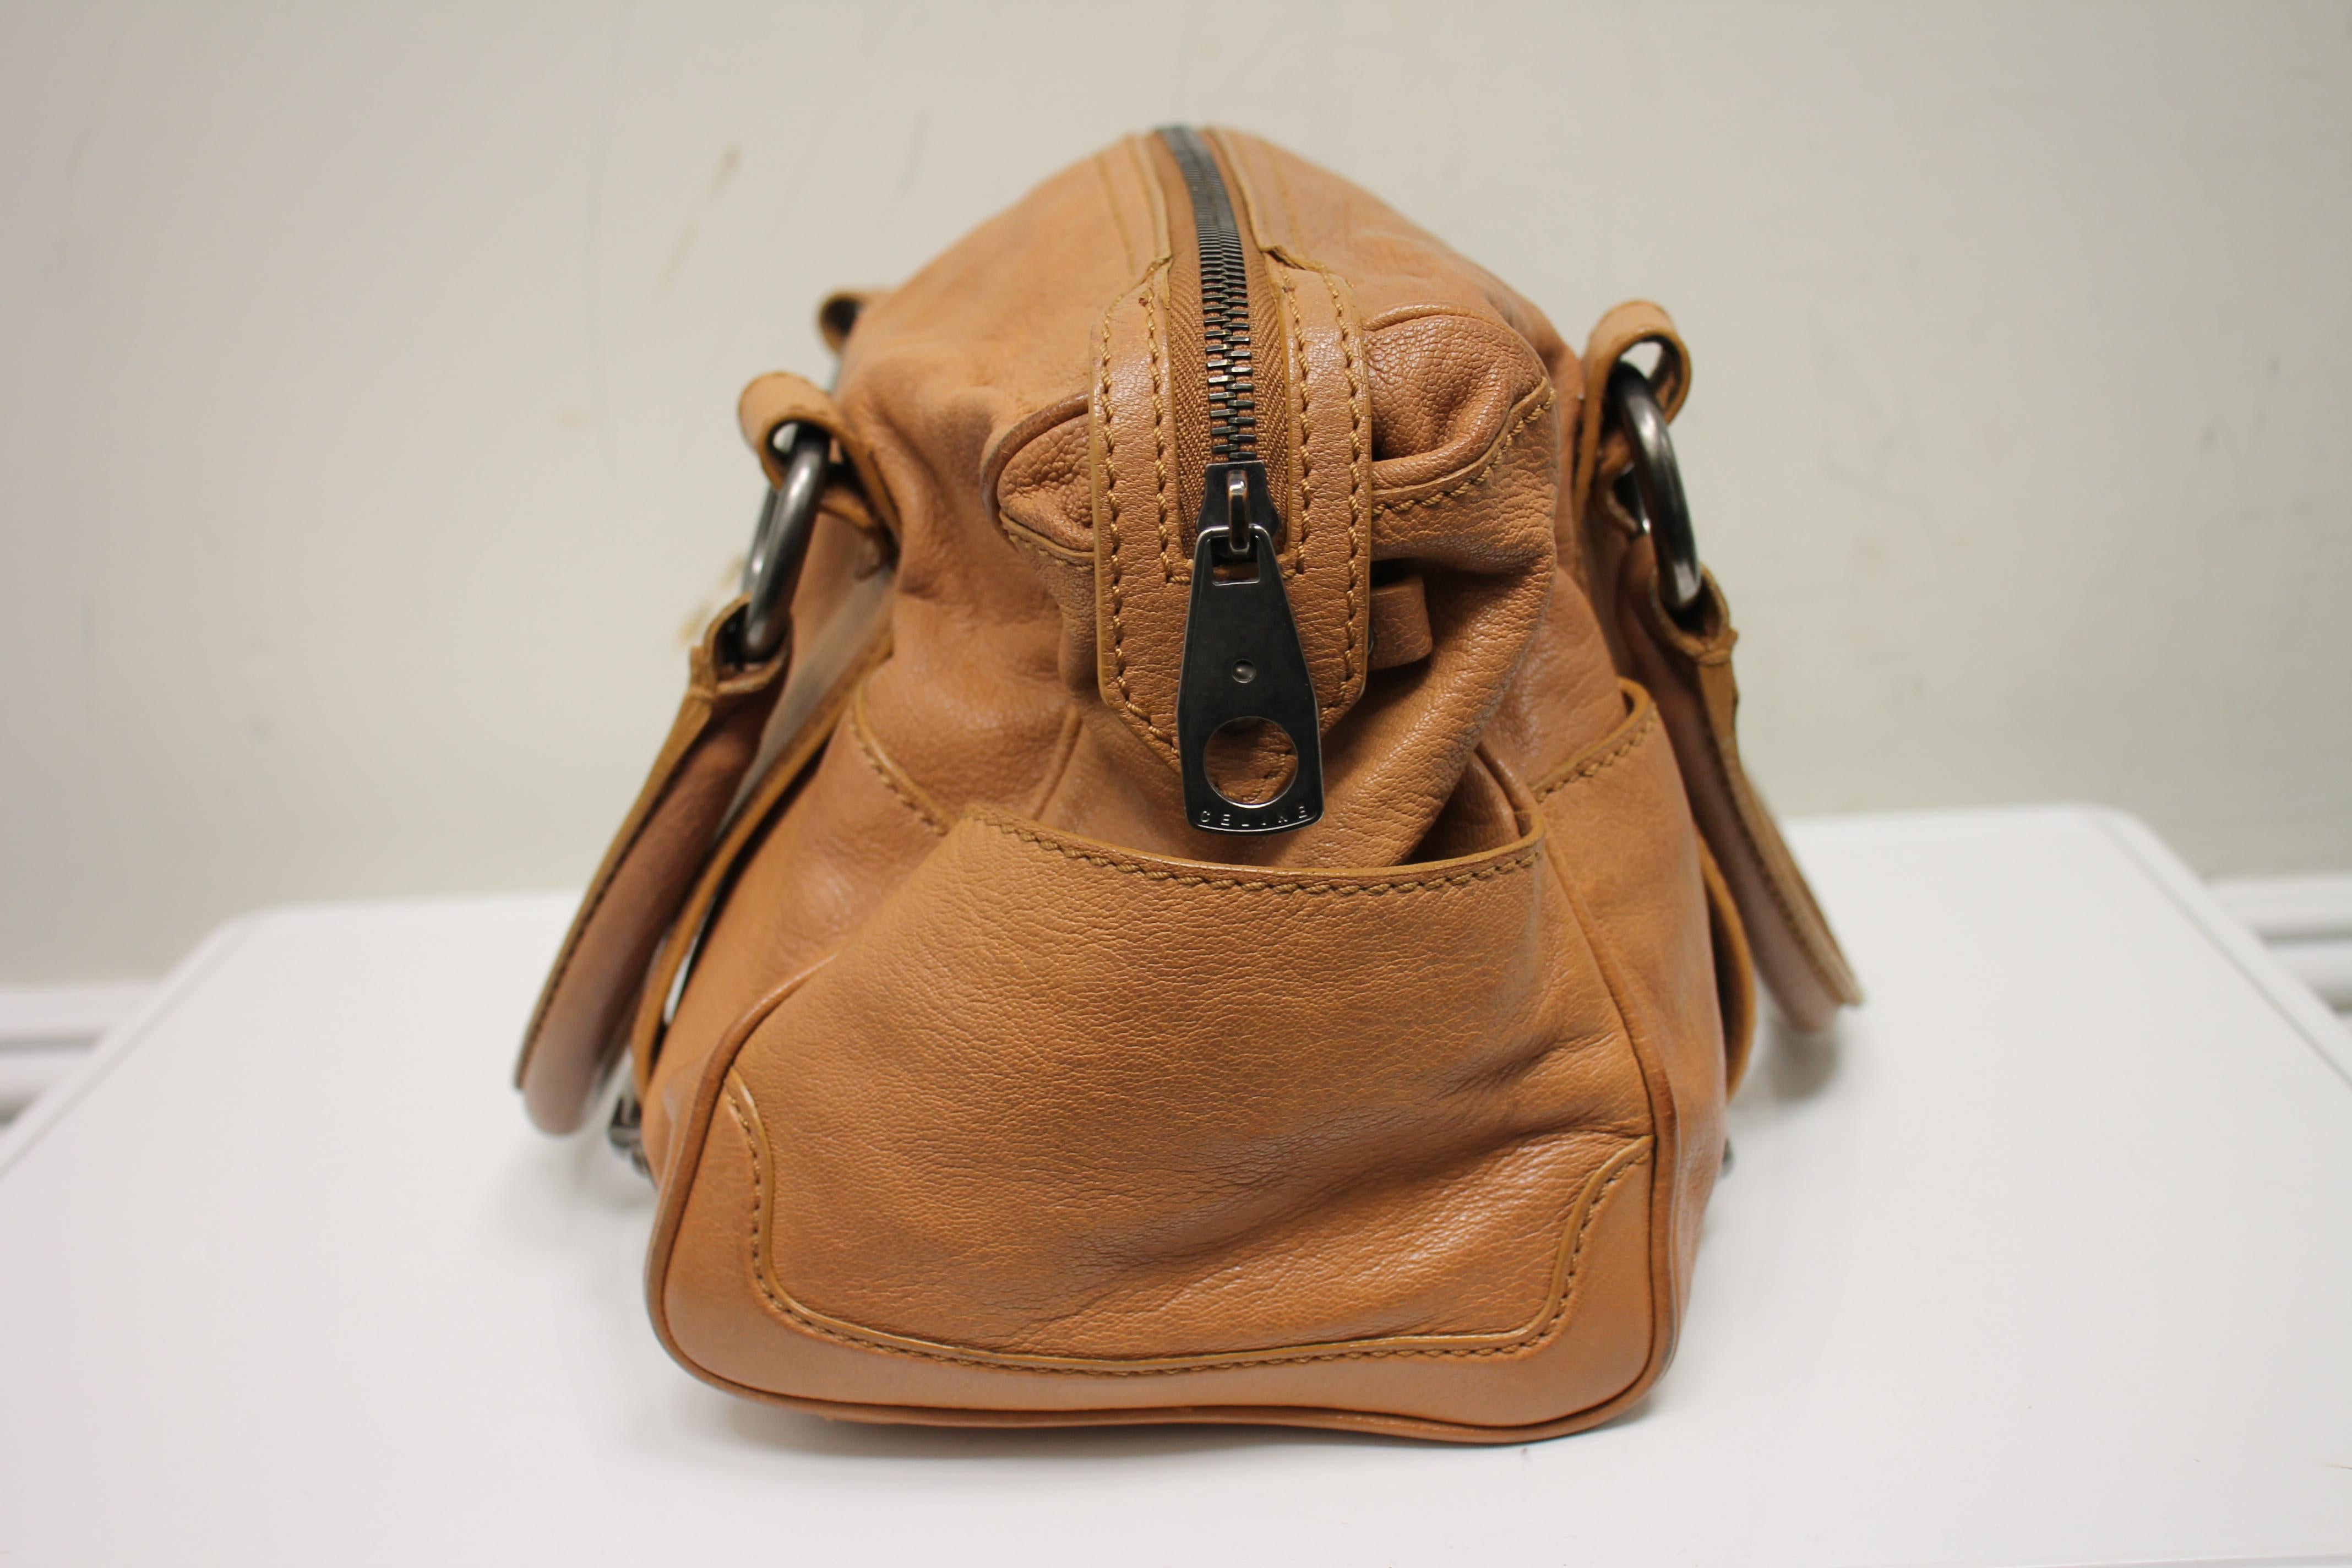 Brown grained leather. Antiqued silver-tone hardware. Zipper closure at top. Dual rolled top handles. Side exterior pockets. One exterior pocket with front flap closure. Lined interior. One interior zippered pocket.